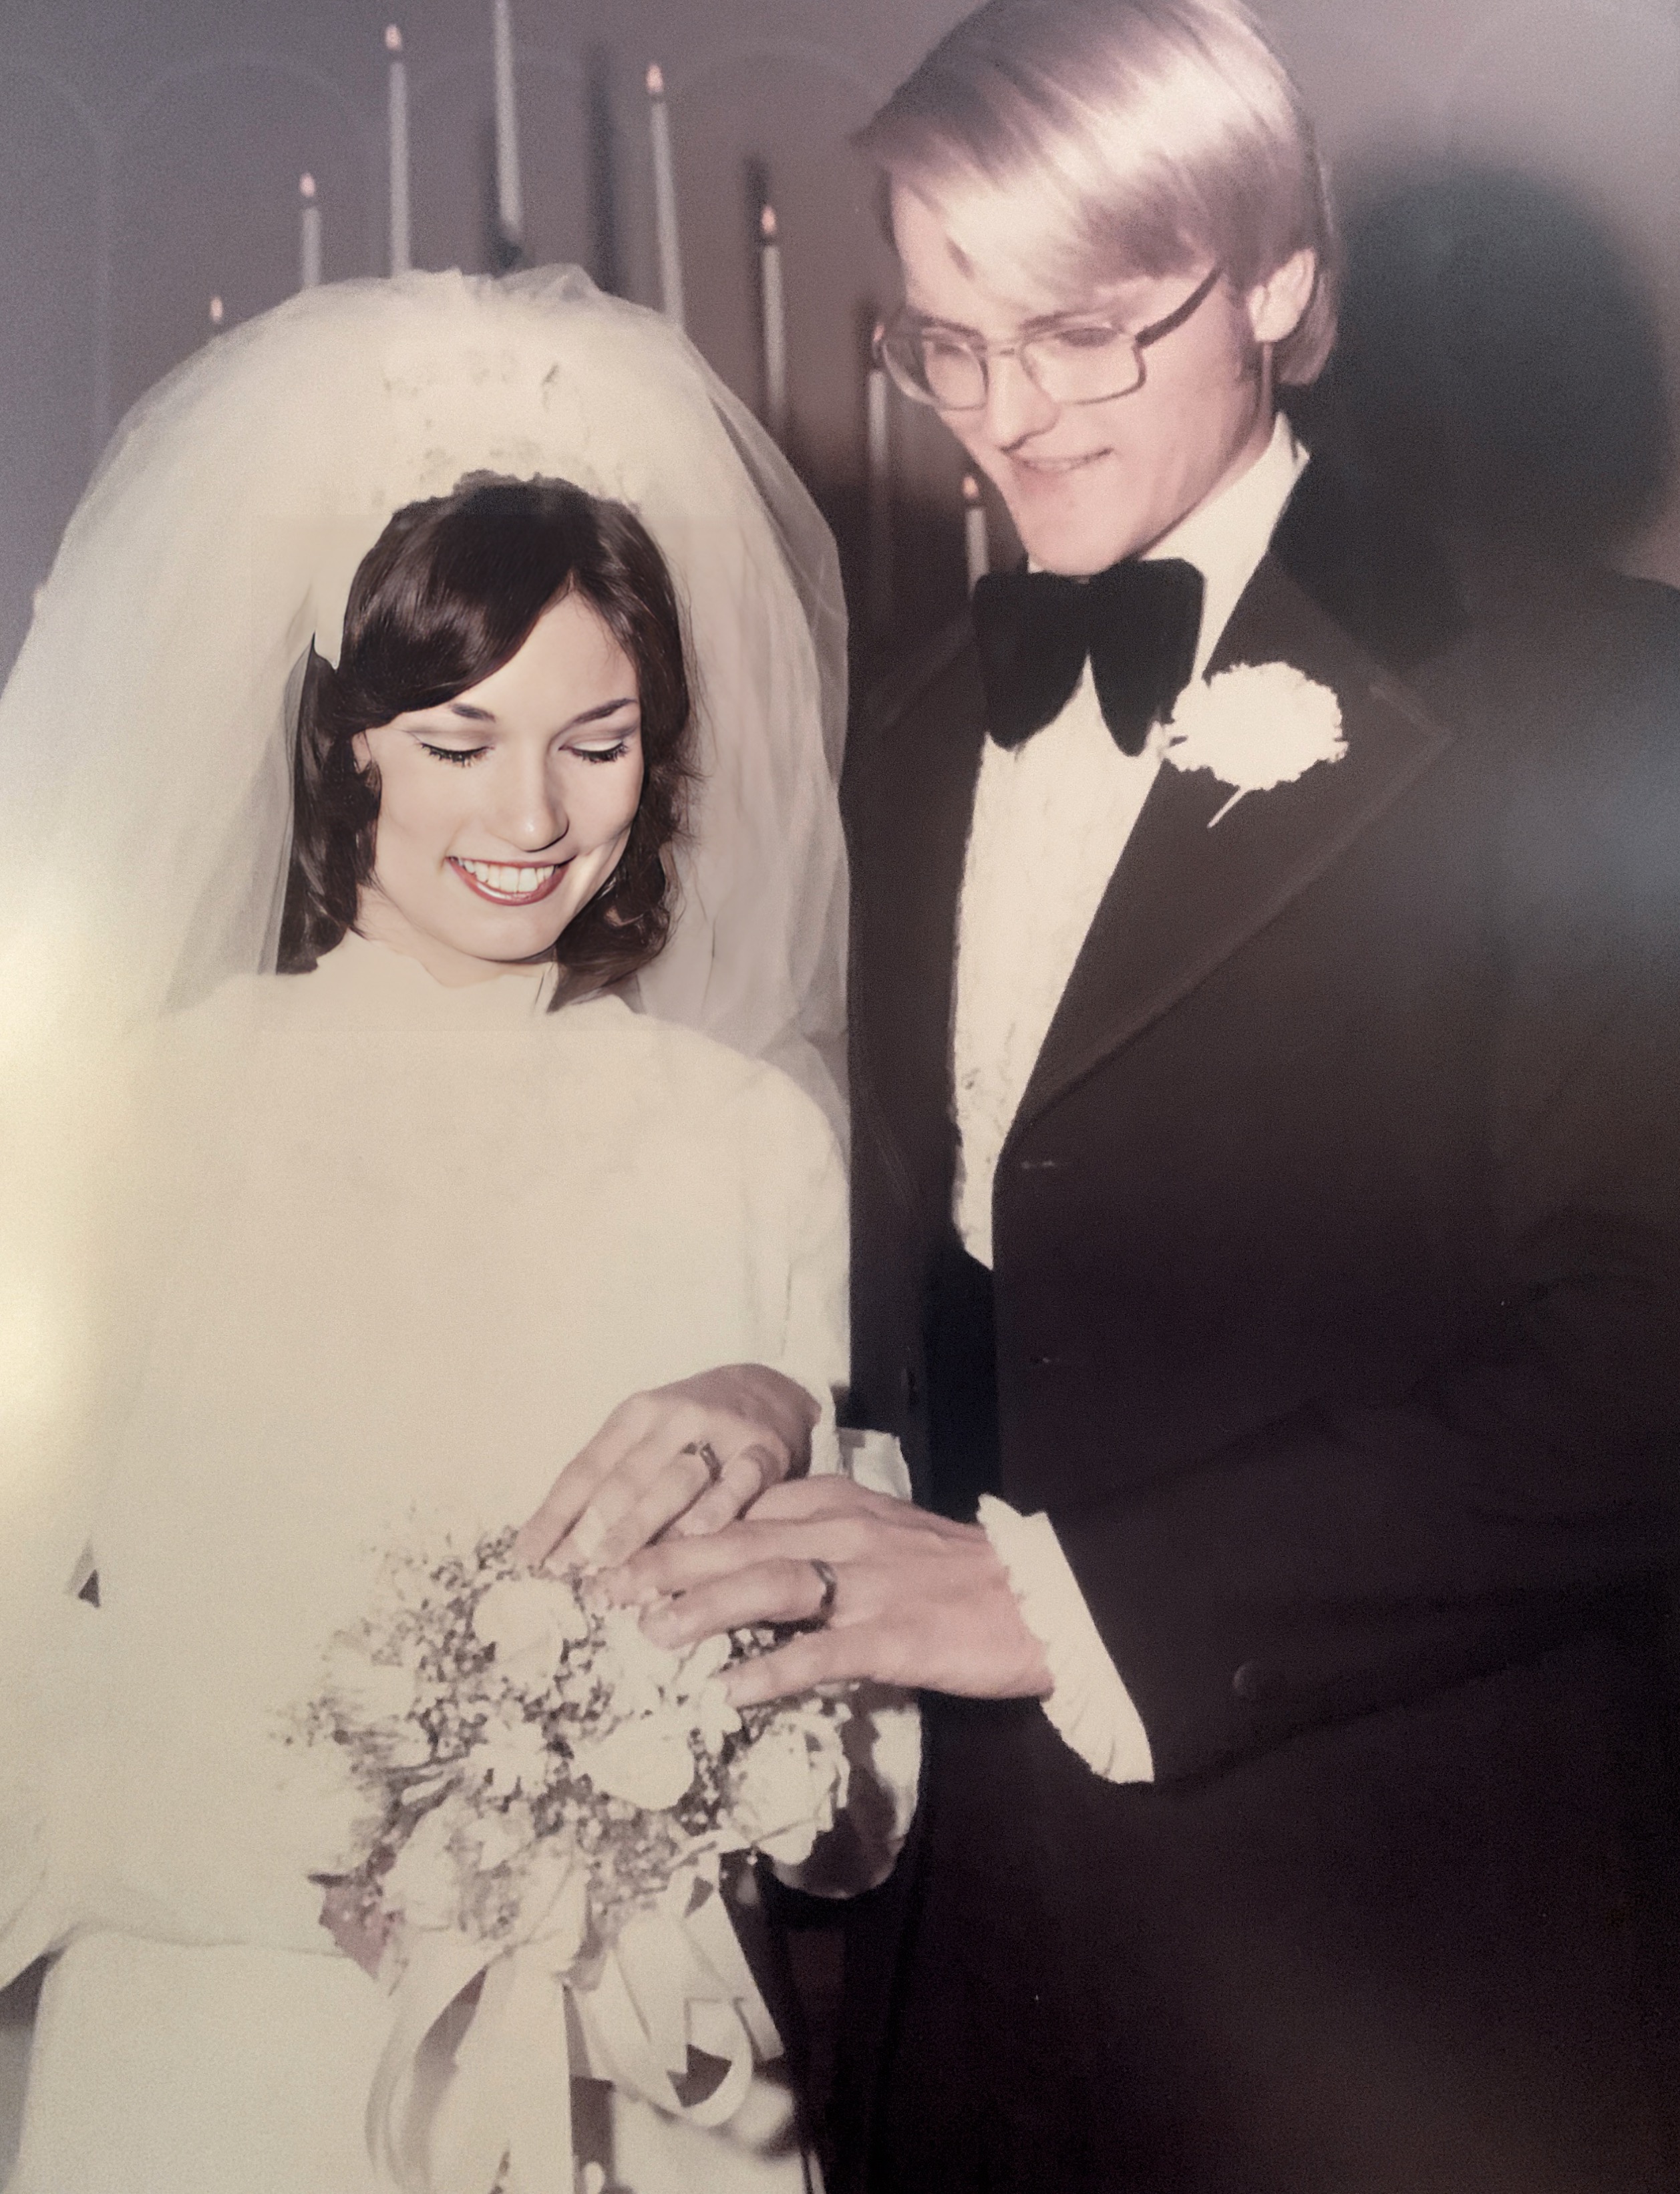 Our wedding day, May 23, 1975